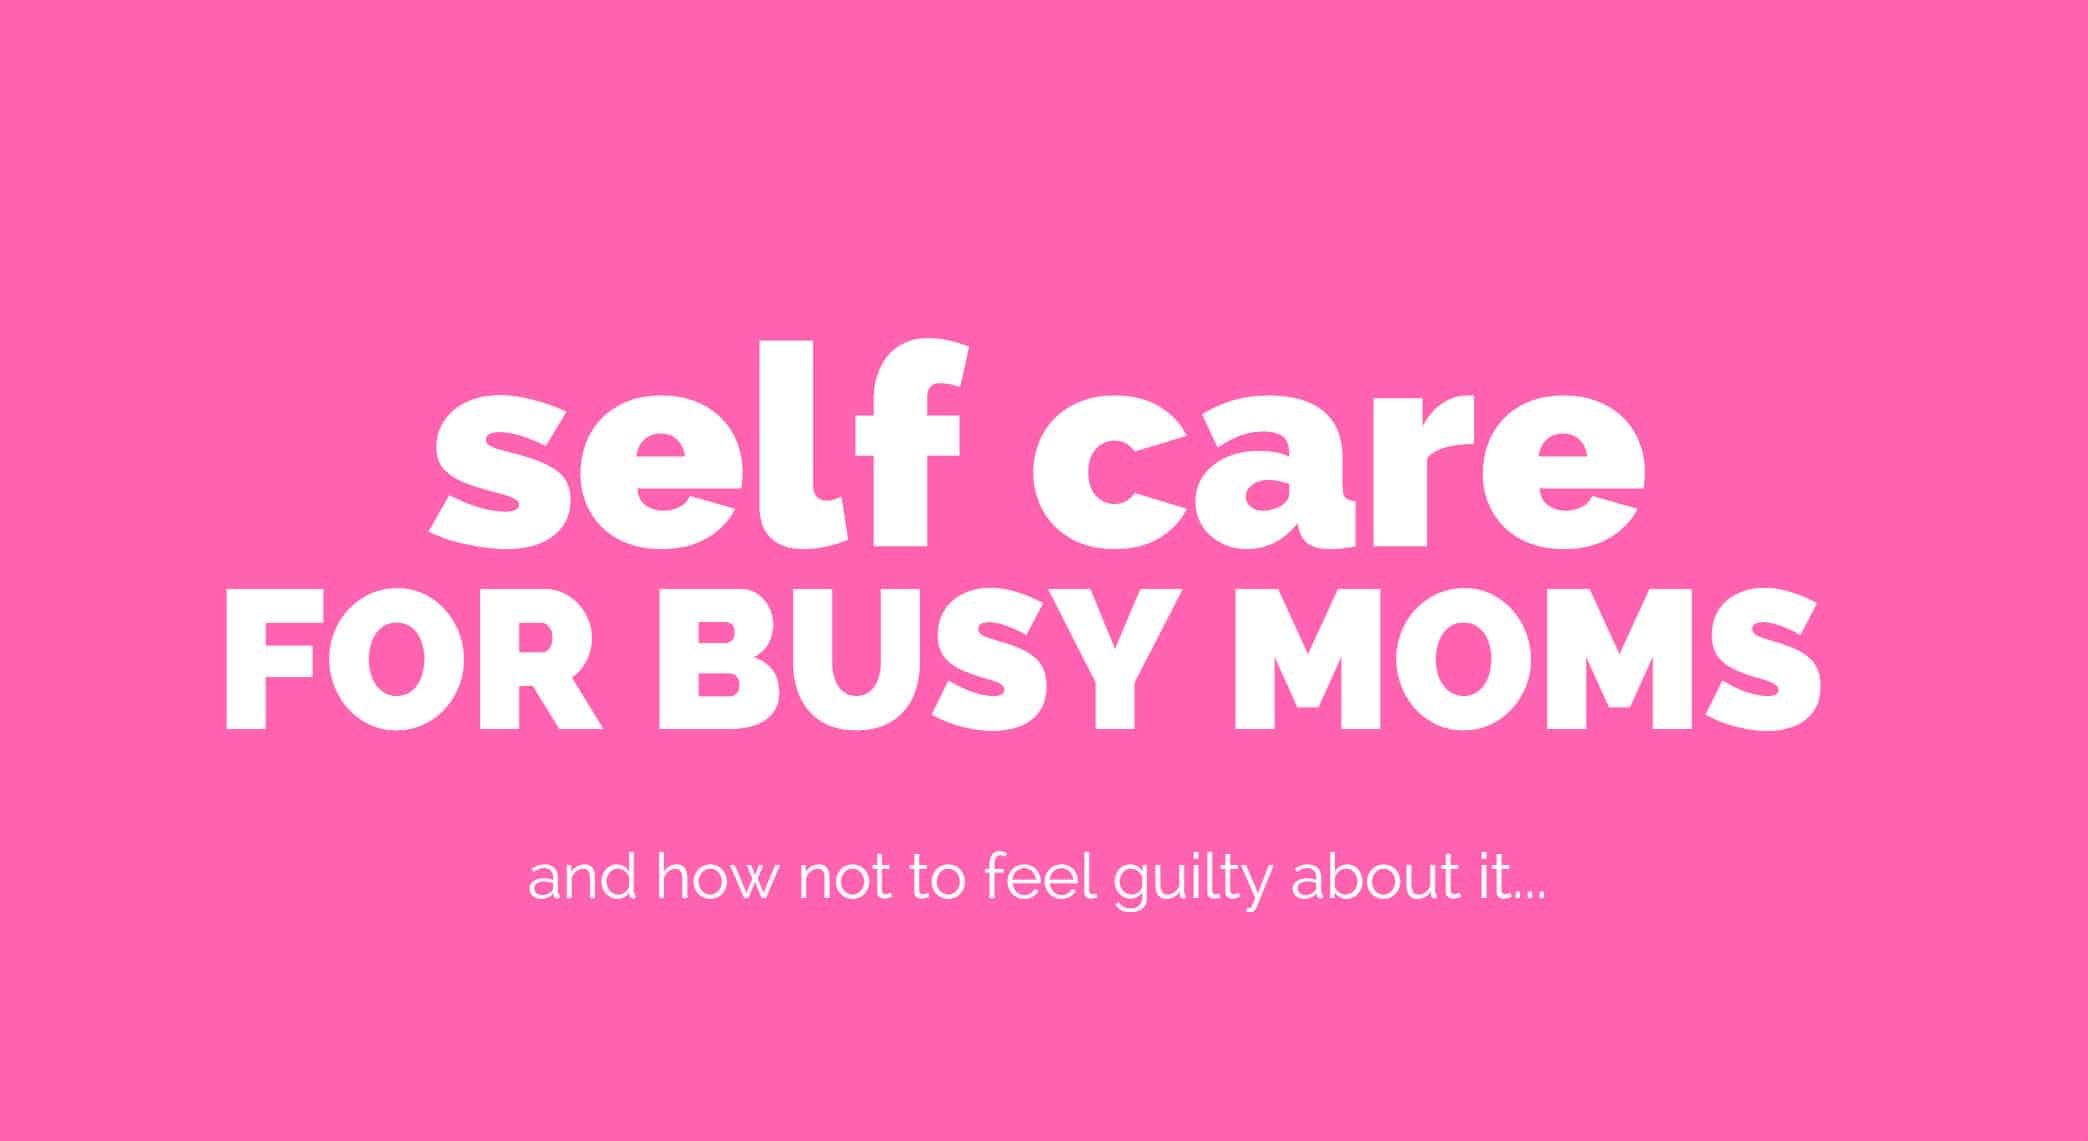 7 Ways to Practice Self Care as a Busy Mom Without Feeling Guilty